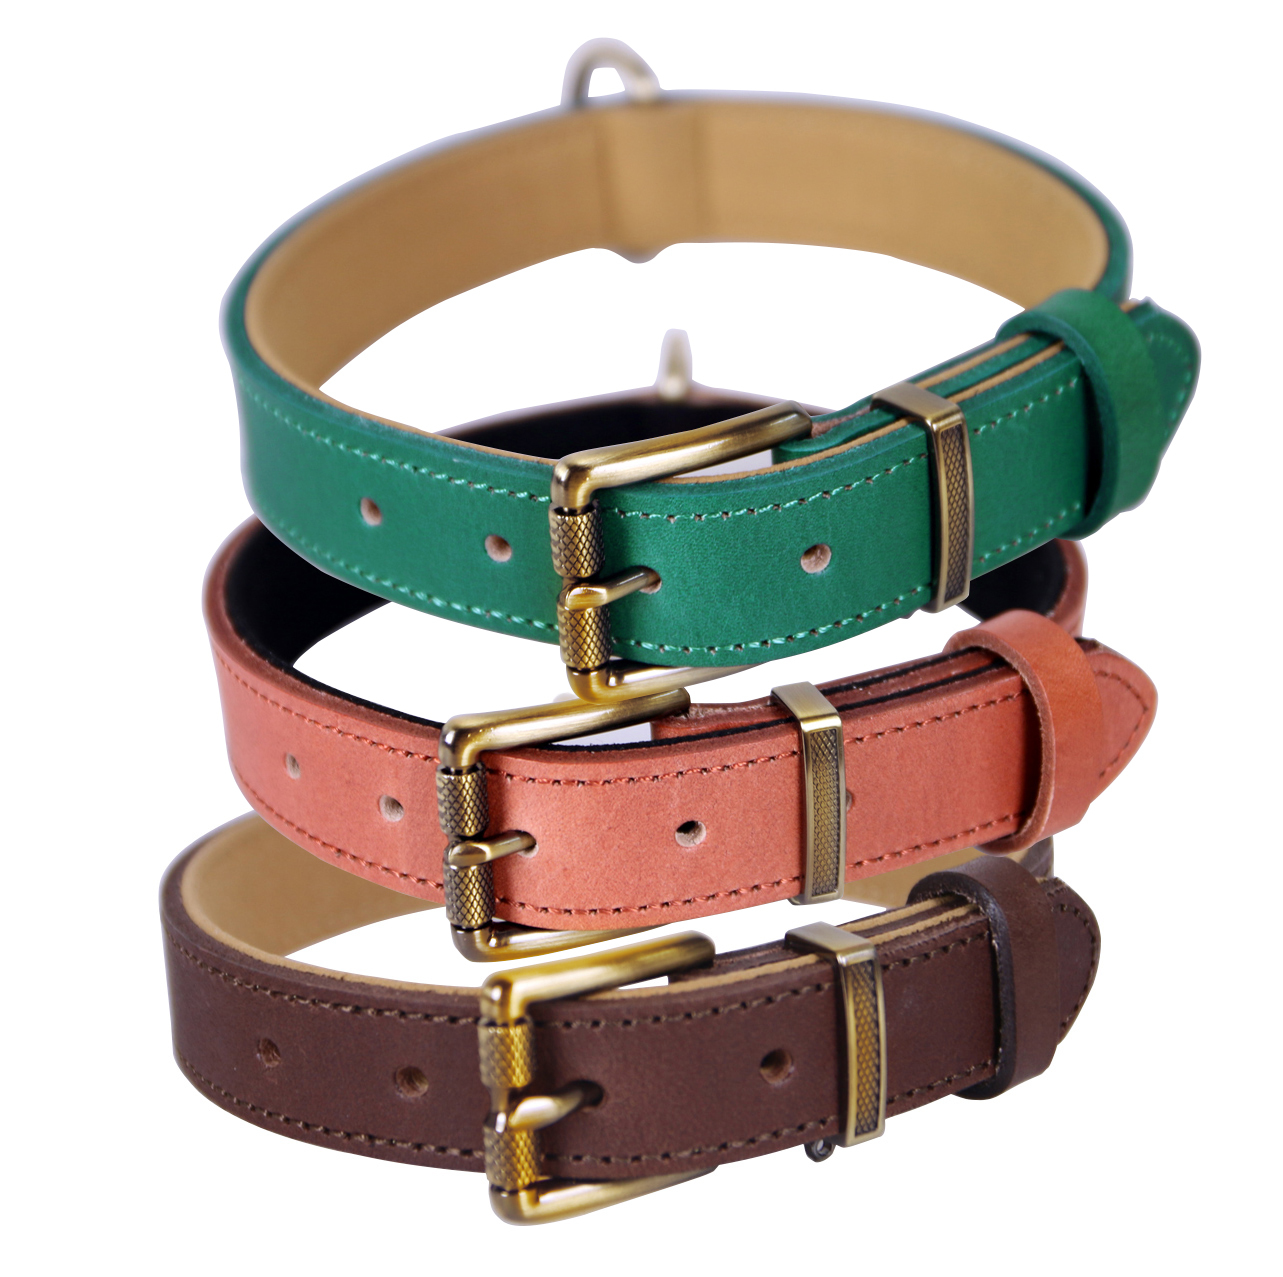 How To Measure Leather Dog Collar / double trouble wide leather dog ...